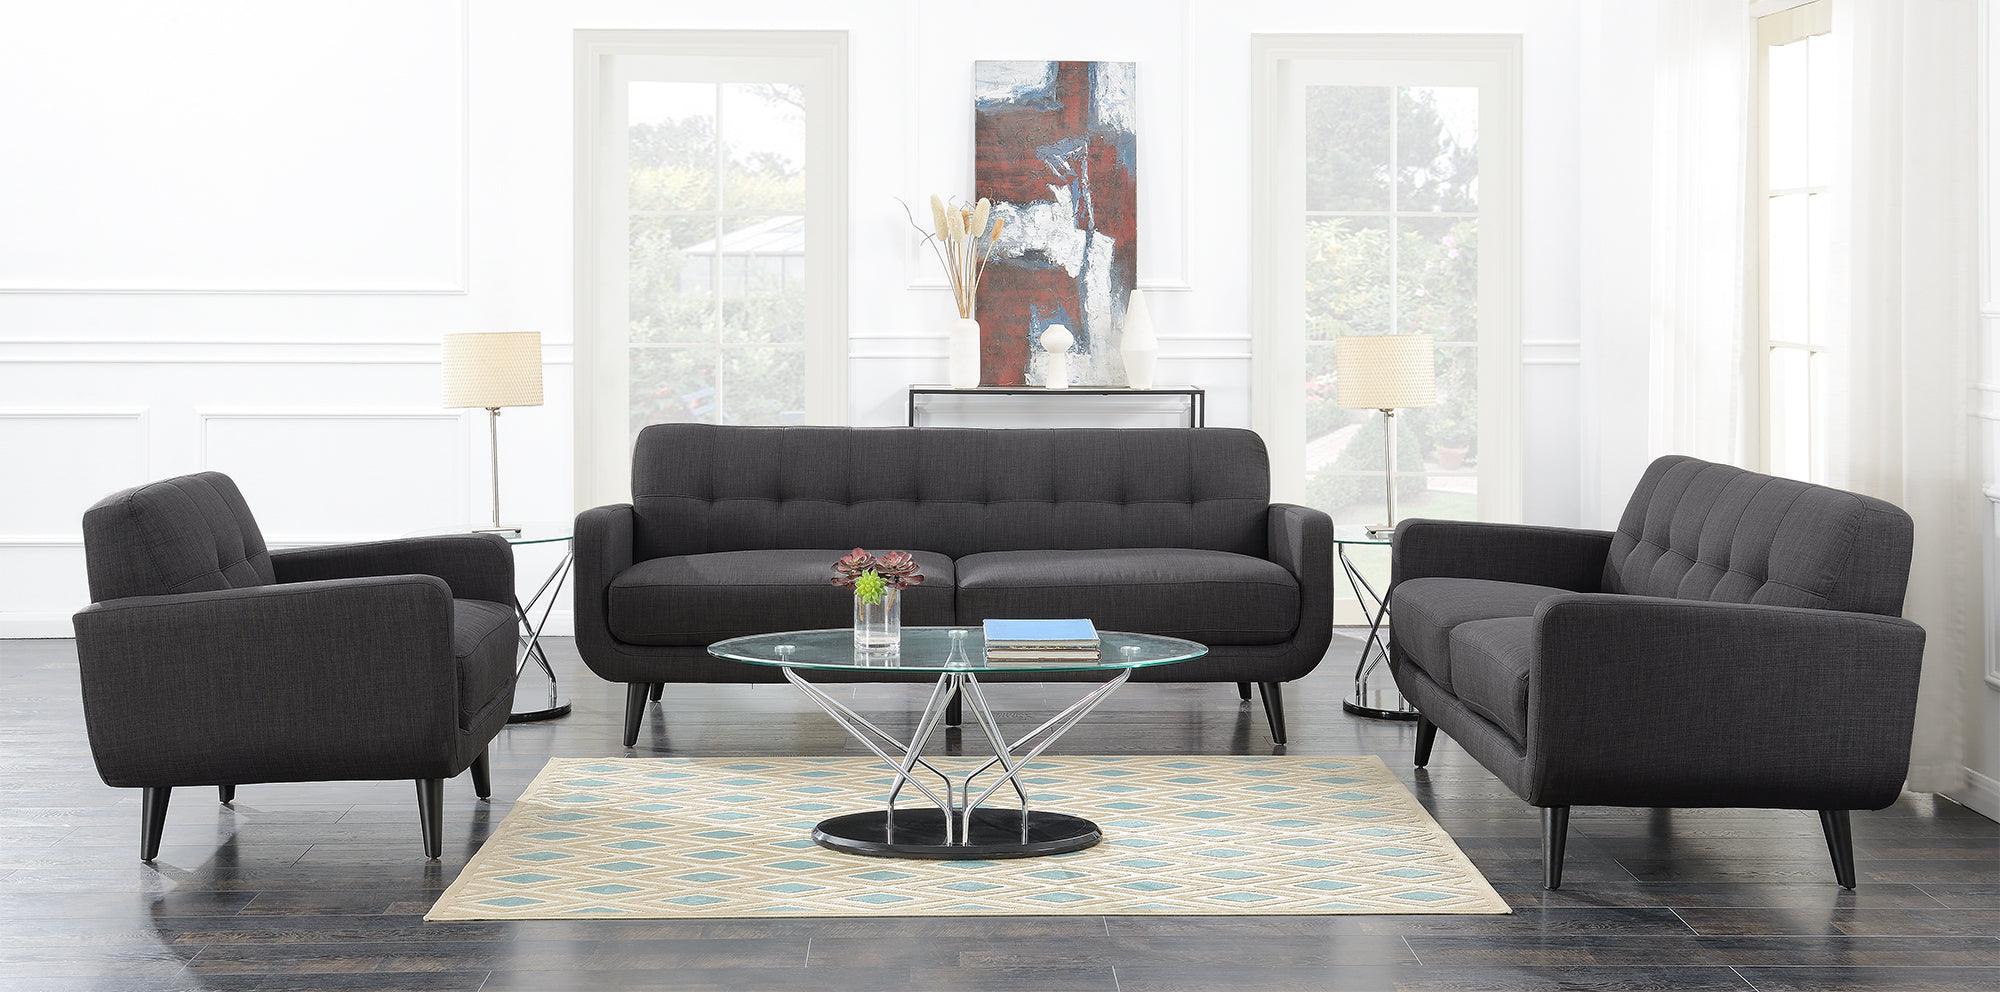 Elements Sofas & Couches - Hailey Sofa Charcoal